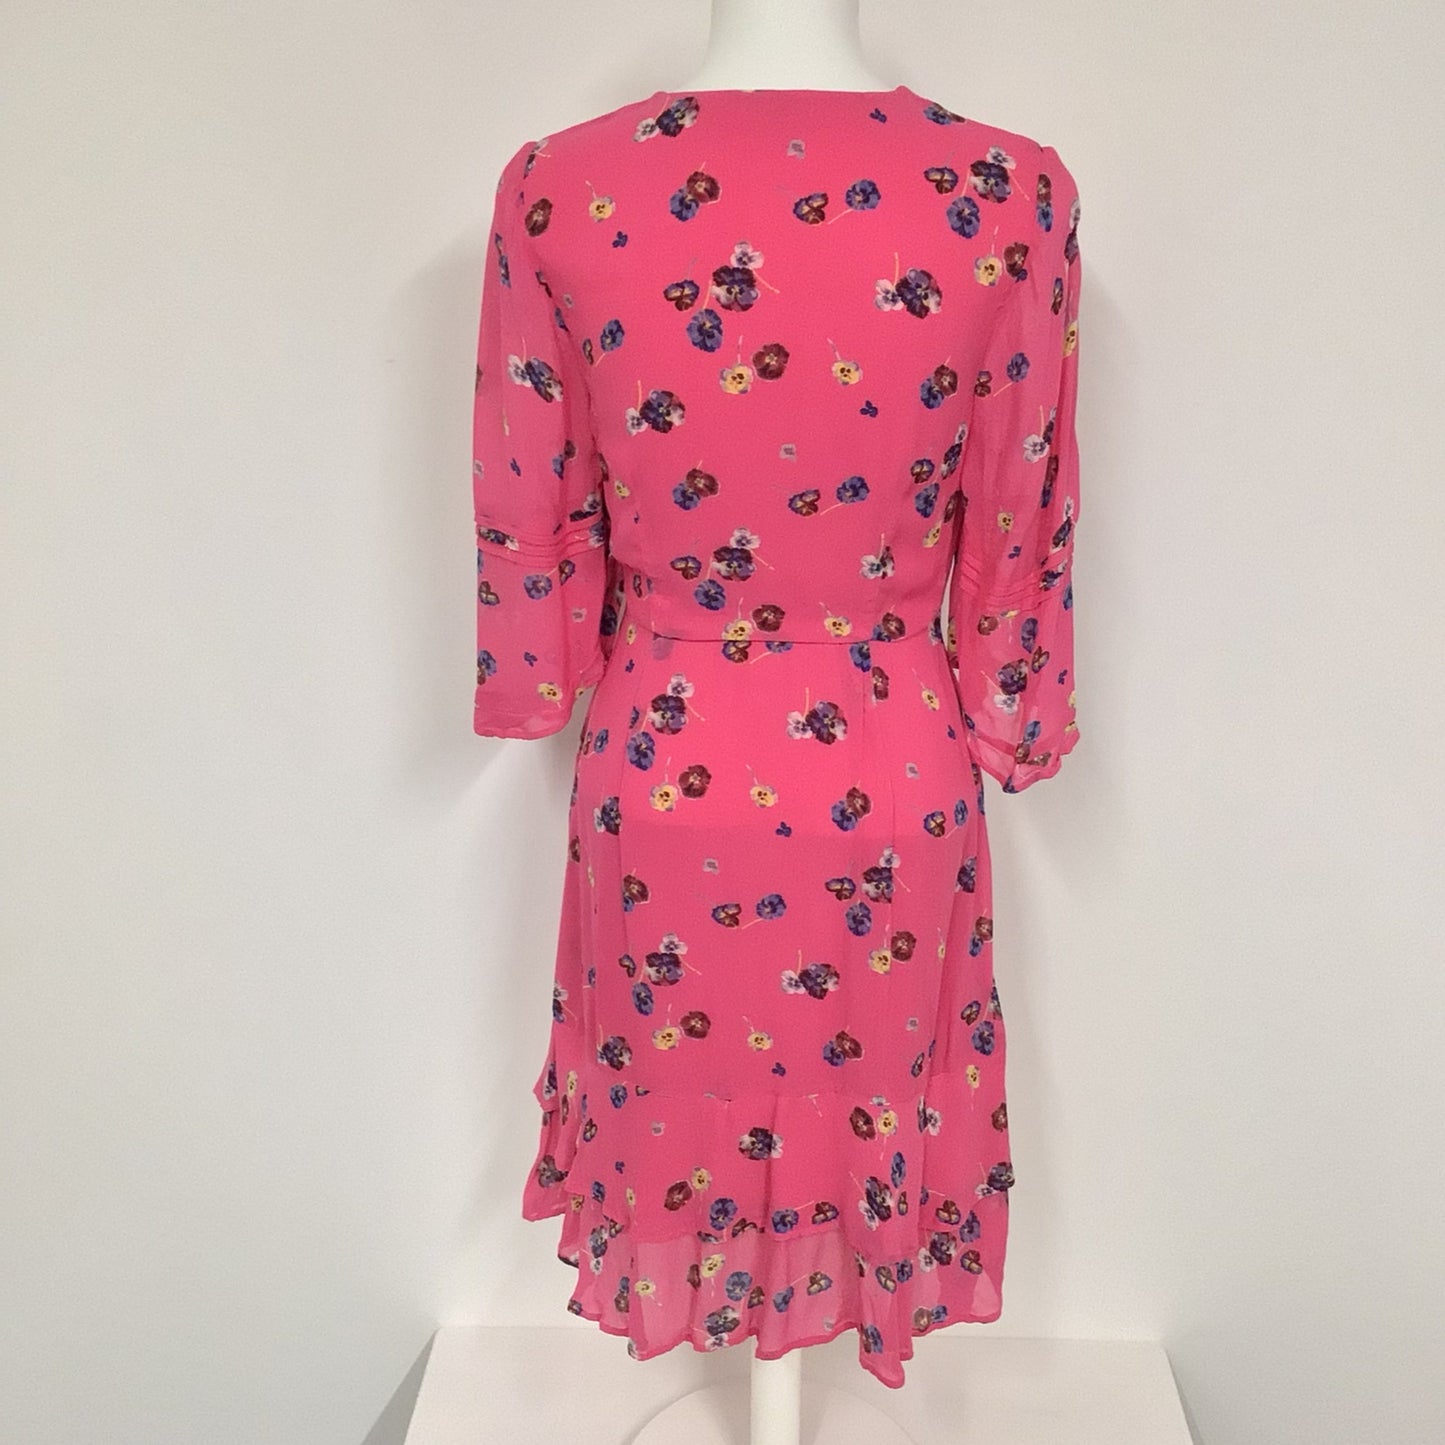 Monsoon Bright Pink Floral Wrap Style Dress Size 10